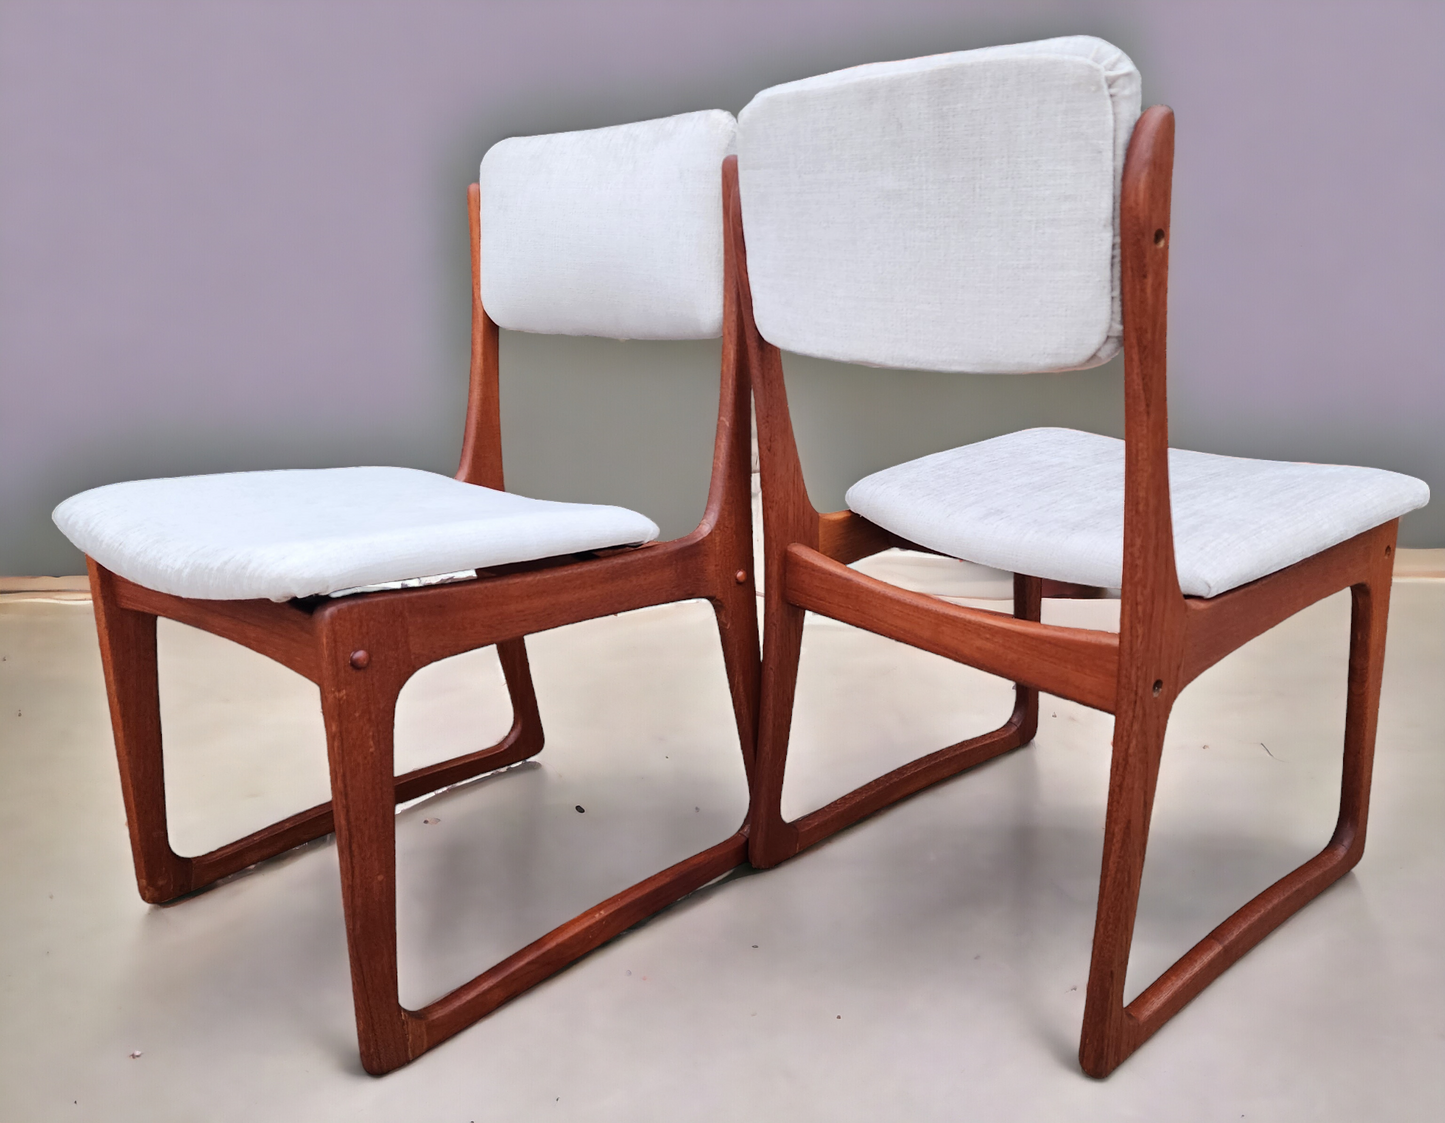 On Hold***4 REFINISHED REUPHOLSTERED in Knoll fabric Mid Century Modern Teak Chairs by RS Associates